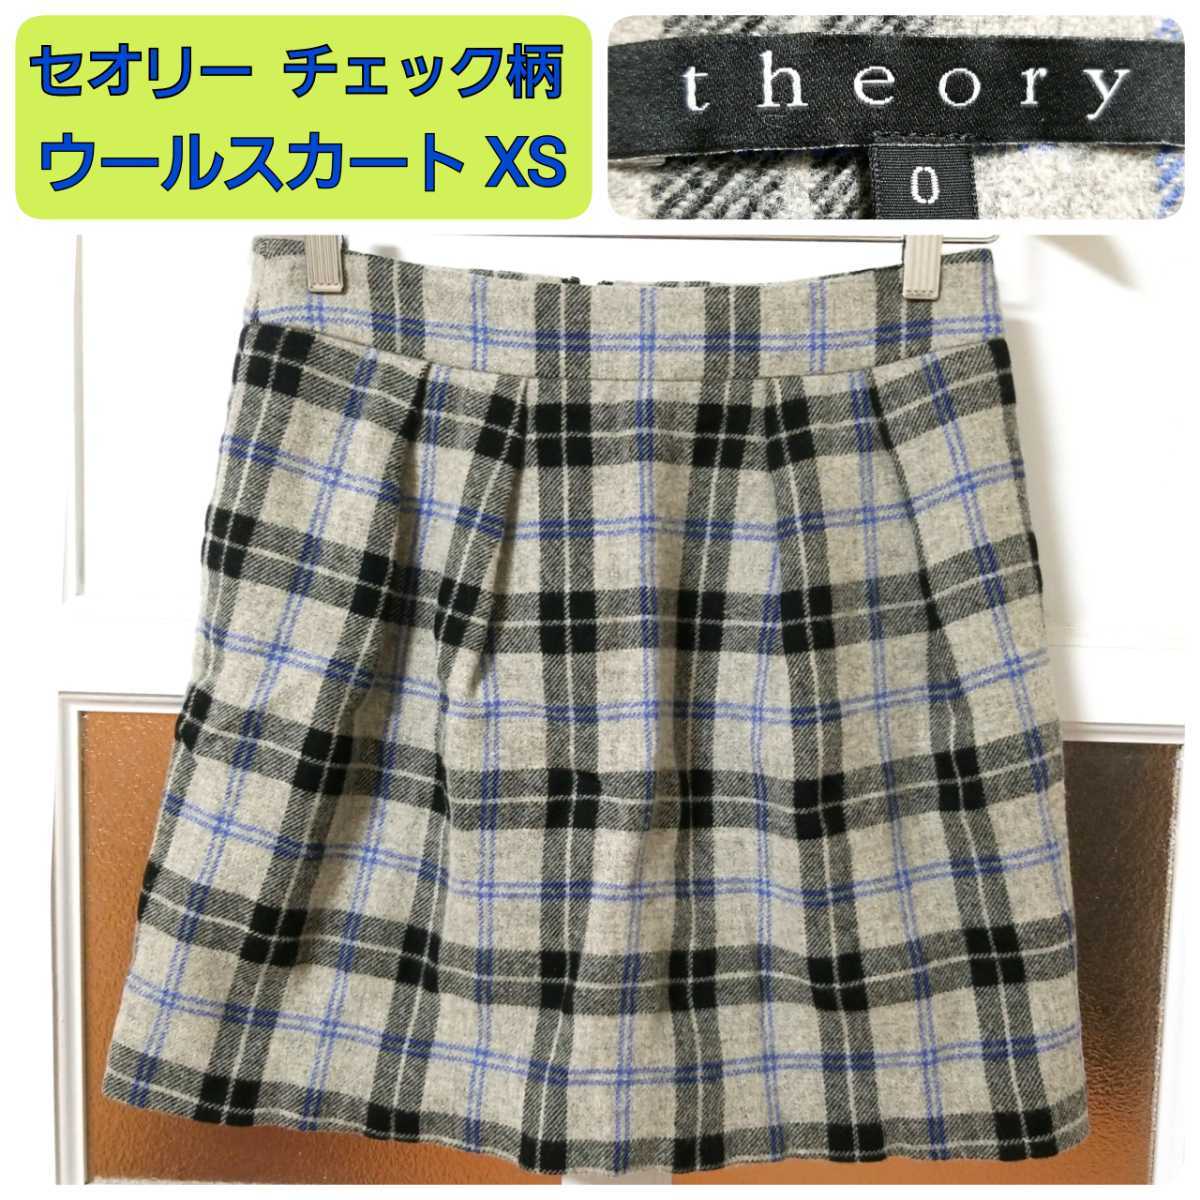  theory spring autumn winter wool black × blue × gray check pattern ko Kuhn tight skirt 0(XS size /5 number ) suit small size 